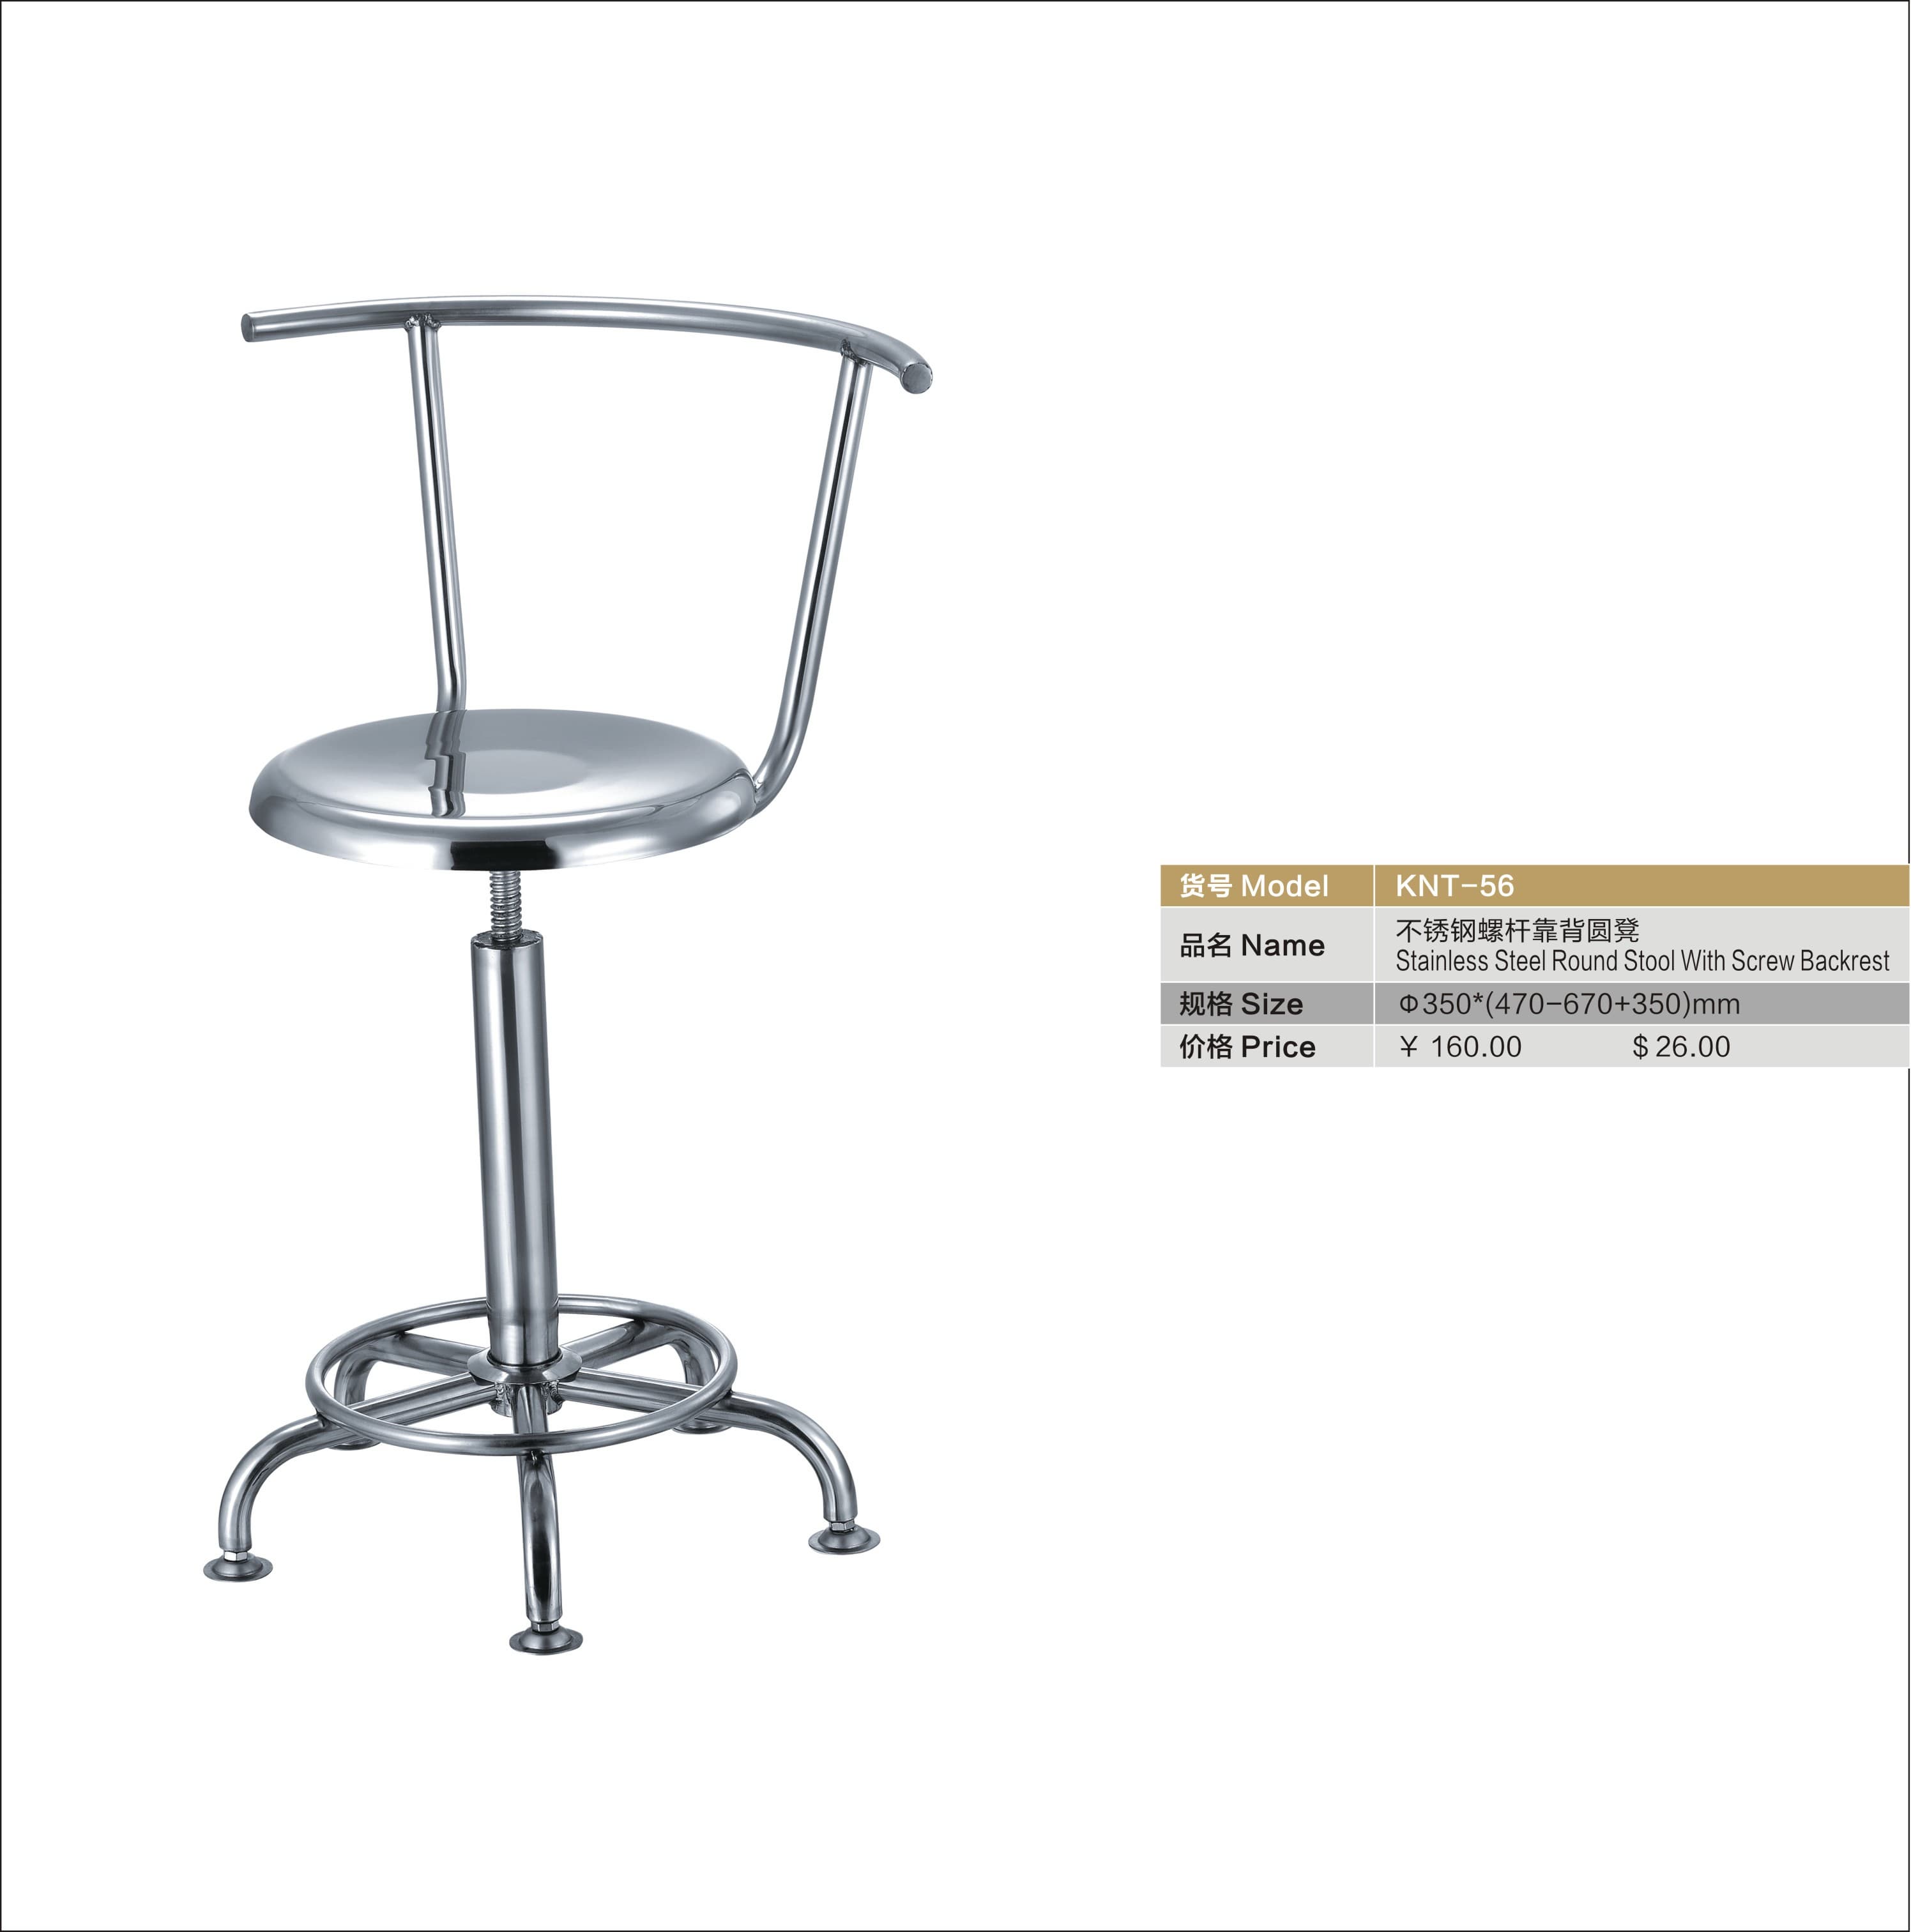 stainless steel round stool with screw backrest